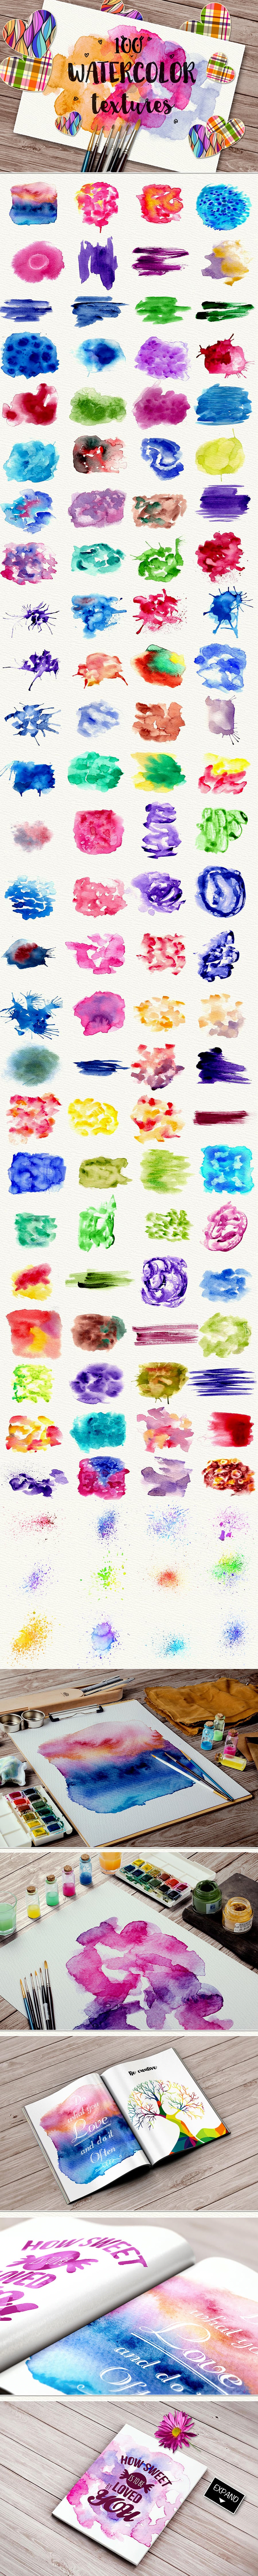 Watercolor stamp Brushes and Splashes